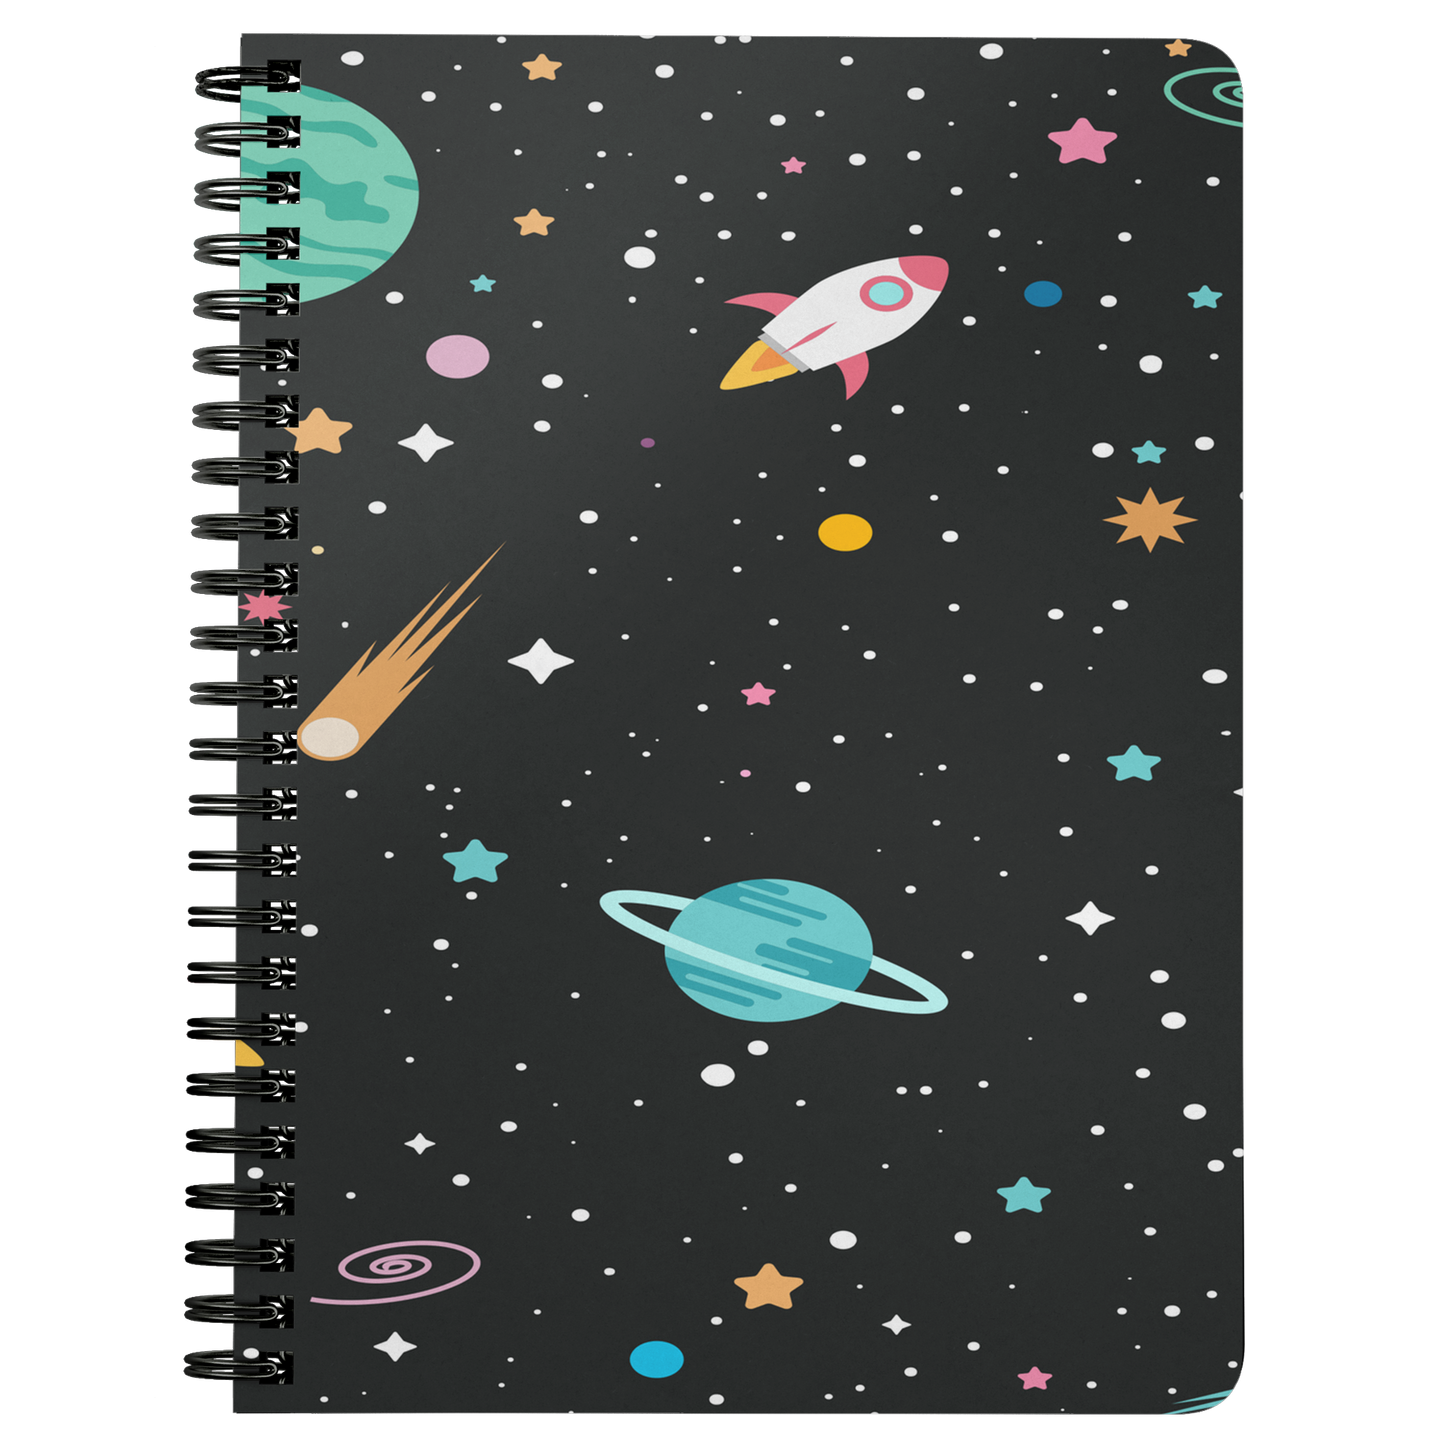 Spiral Notebook Journal  Outer Space Theme  Diary Gift for Her Him Daily Journal Custom